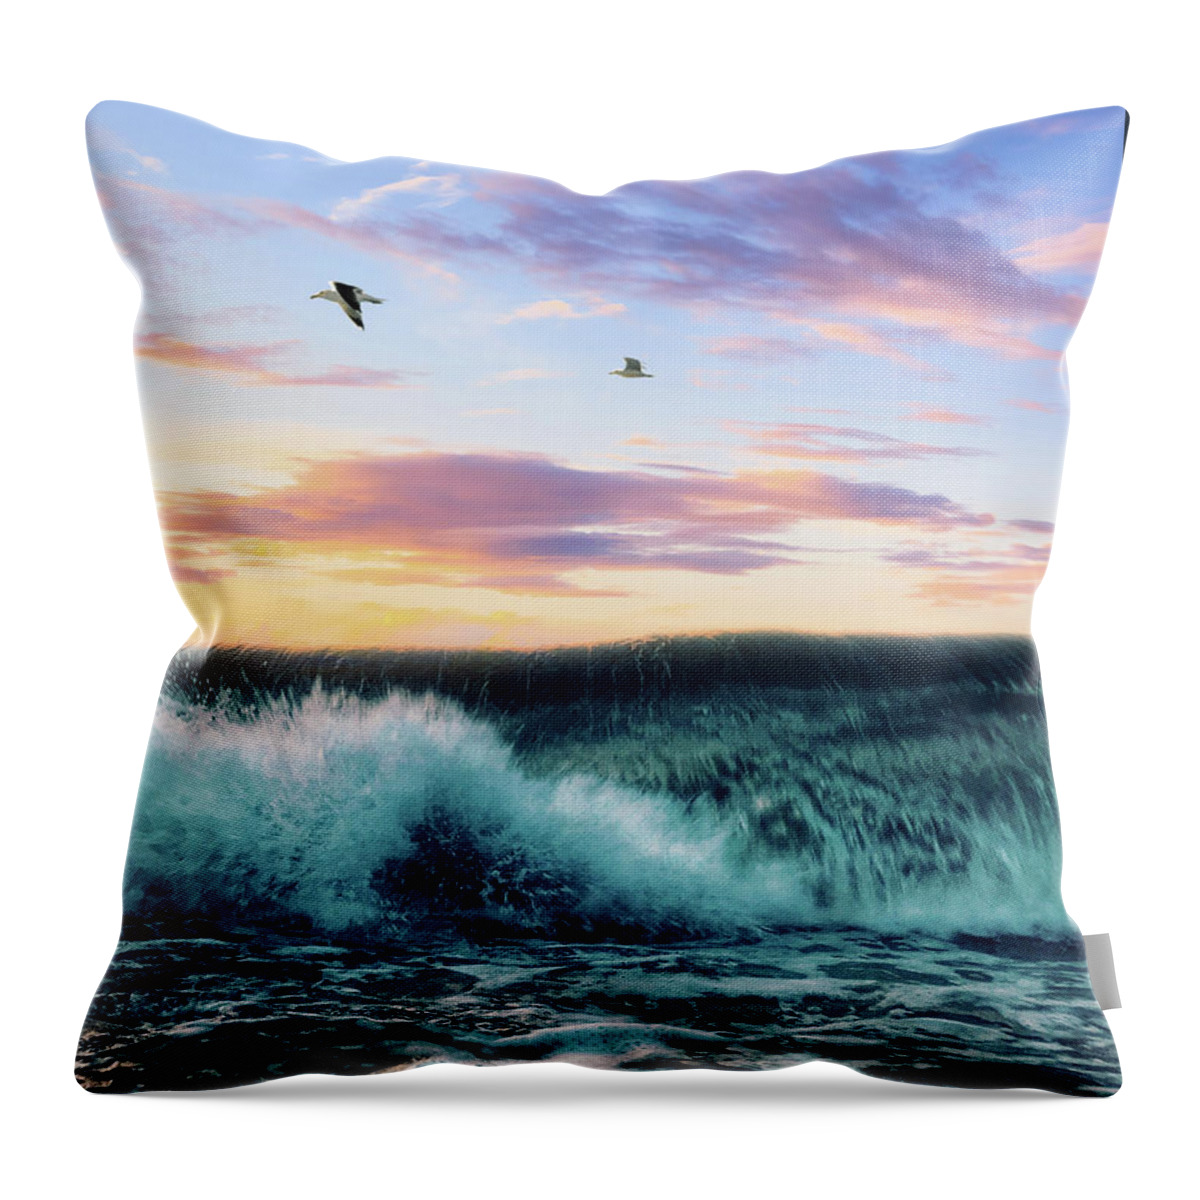 Seagulls Throw Pillow featuring the digital art Waves Crashing At Sunset by Phil Perkins